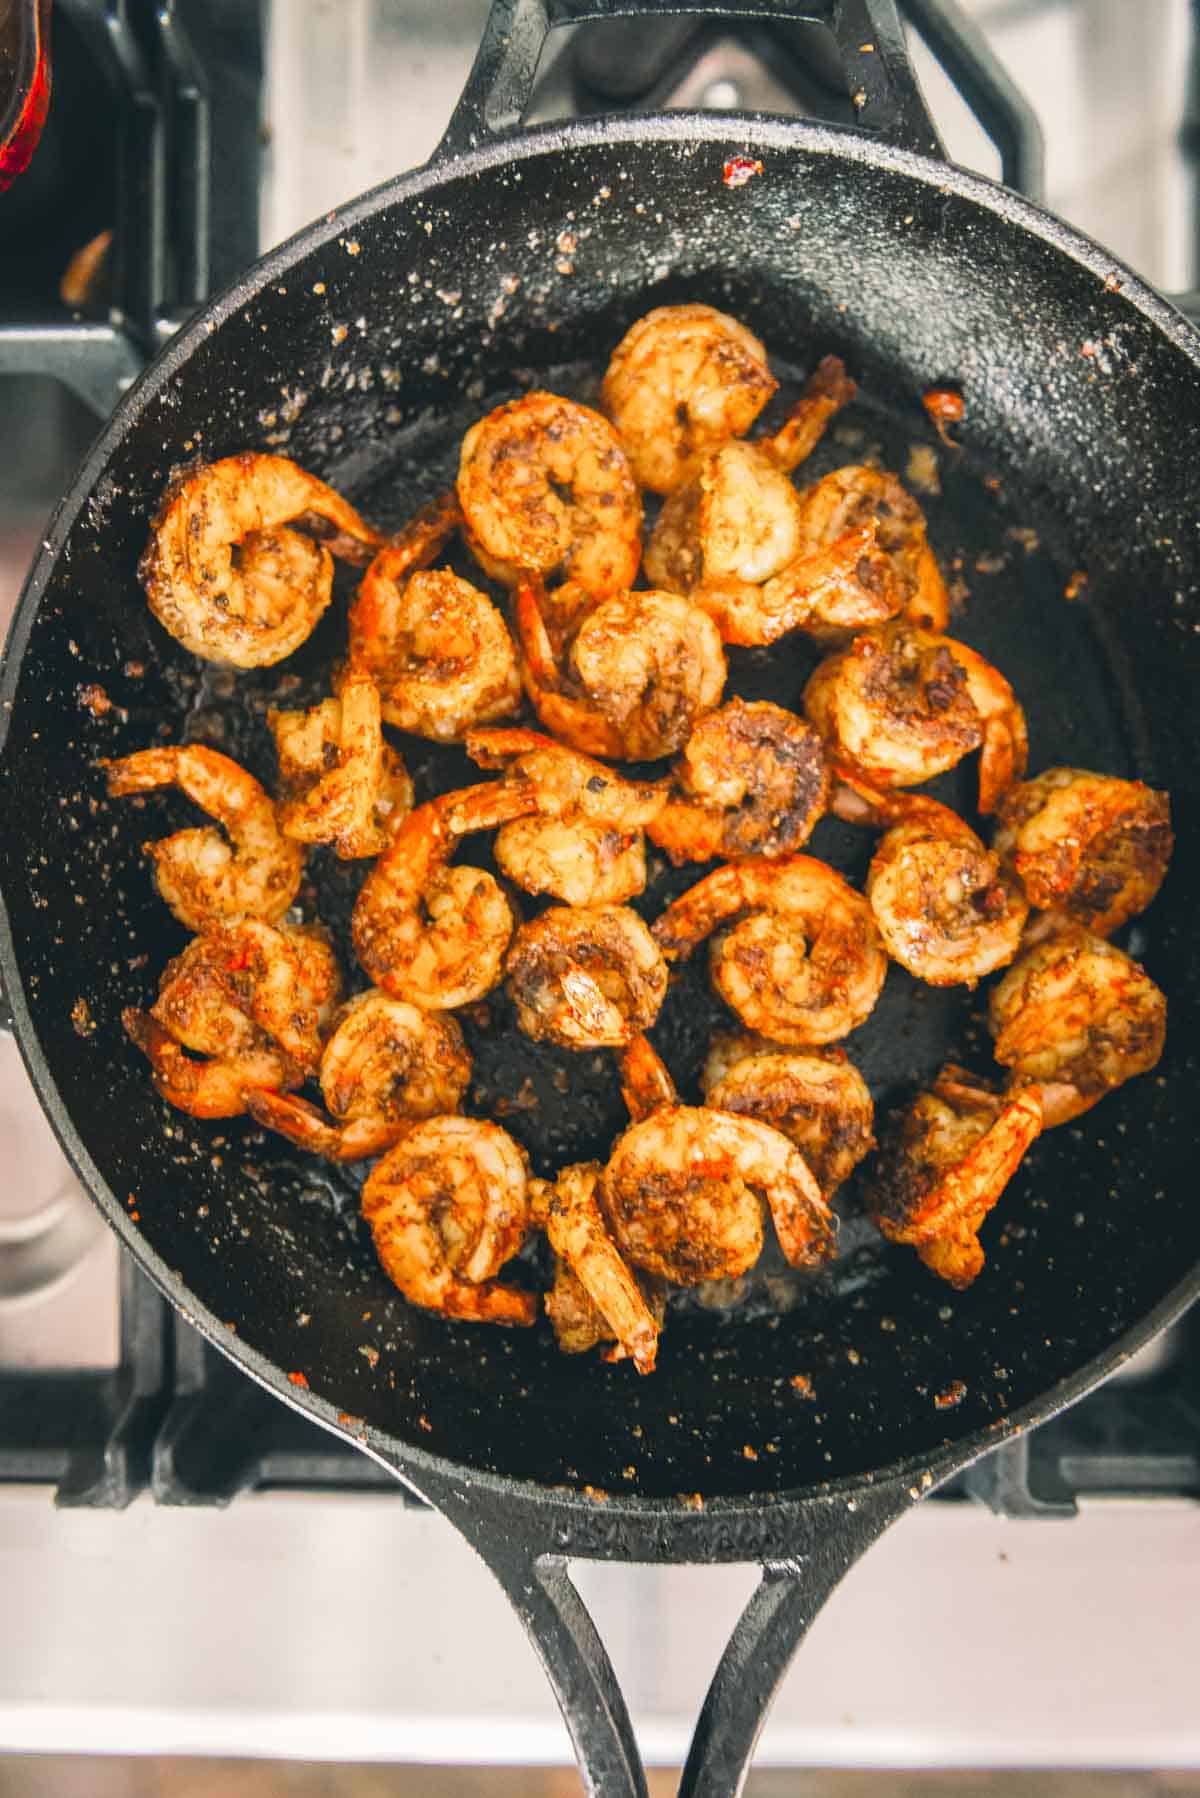 Shrimp coked in the pan. 